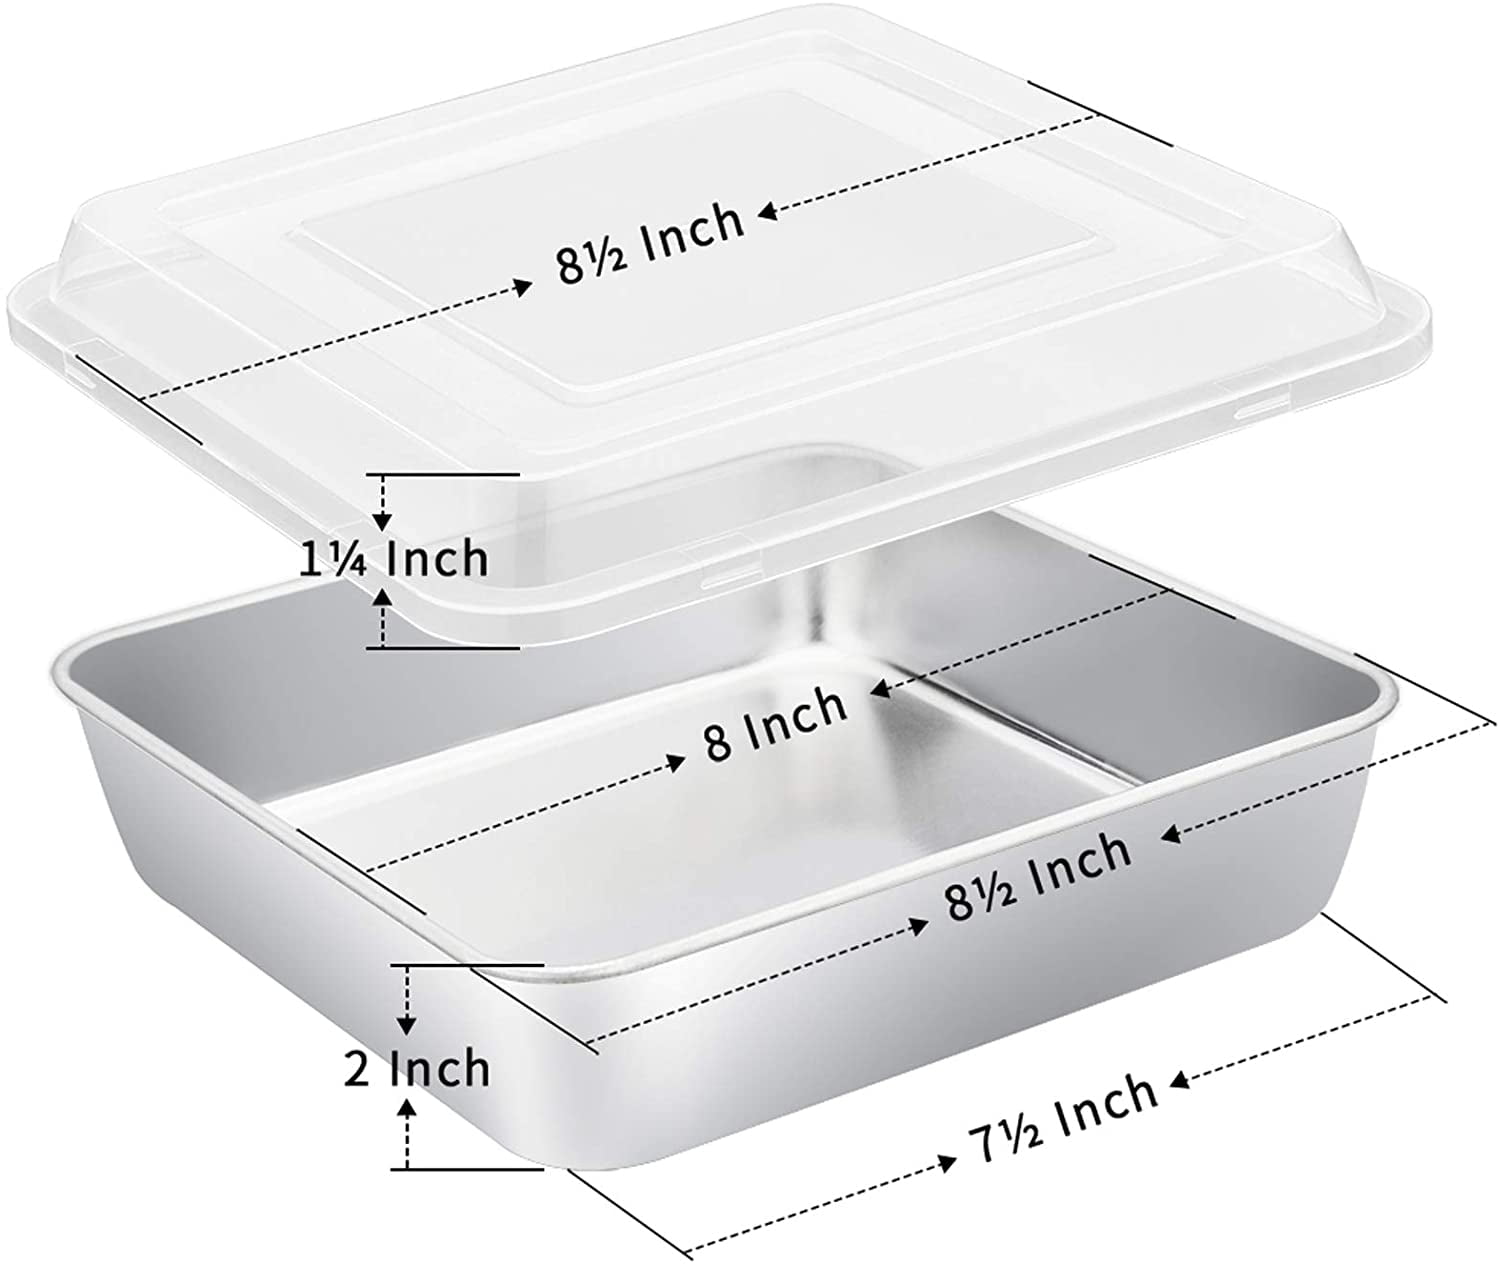 8 x 8 inch Baking Pan with Lid, VeSteel Square Cake Brownie Stainless Steel  Bakeware Set of 2, Non-Toxic & Healthy, Easy Clean & Dishwasher Safe 